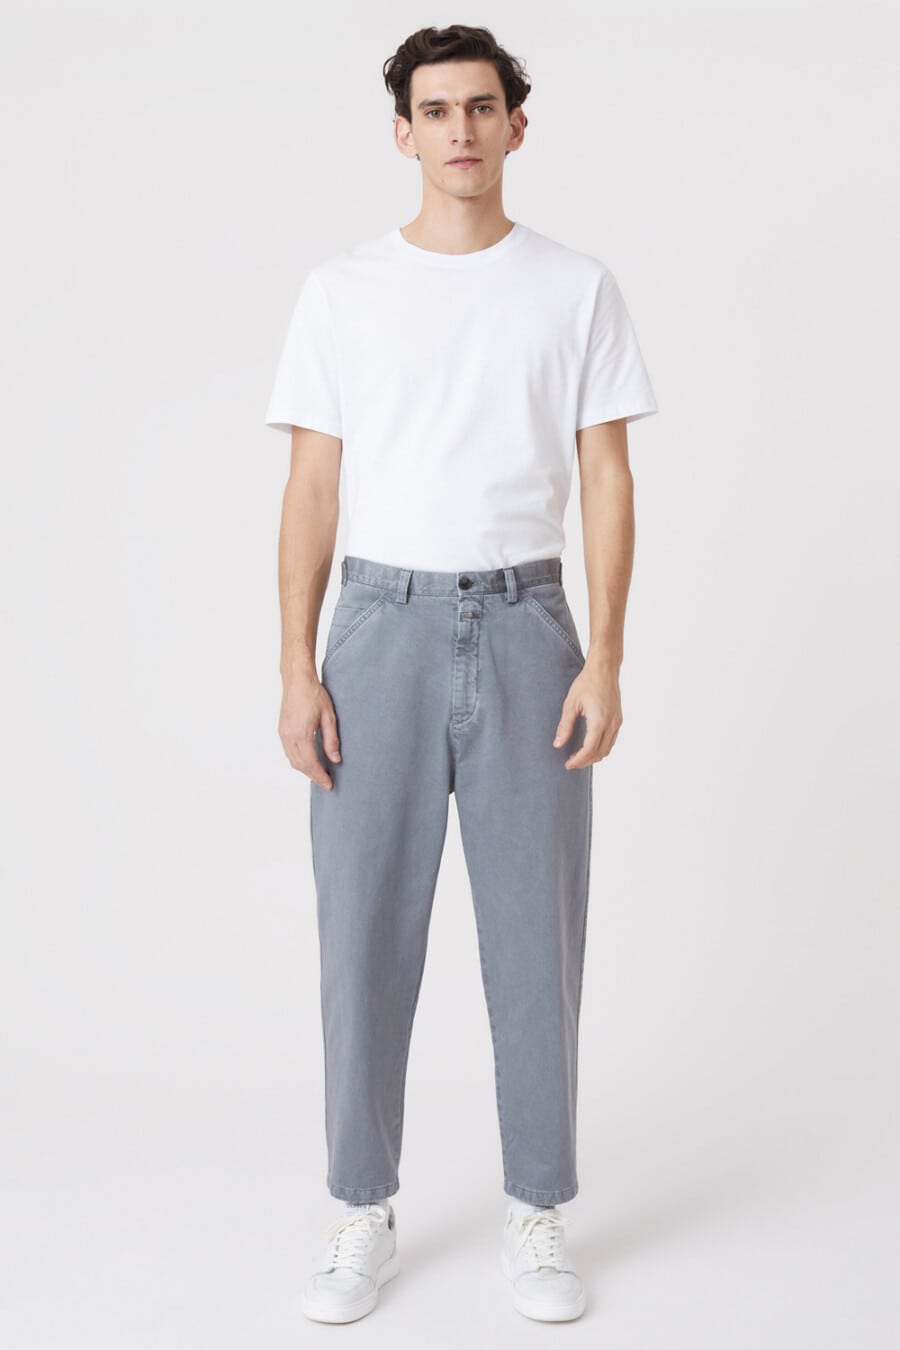 Men's grey wide-leg carrot pants, tucked in white T-shirt and white sneakers outfit